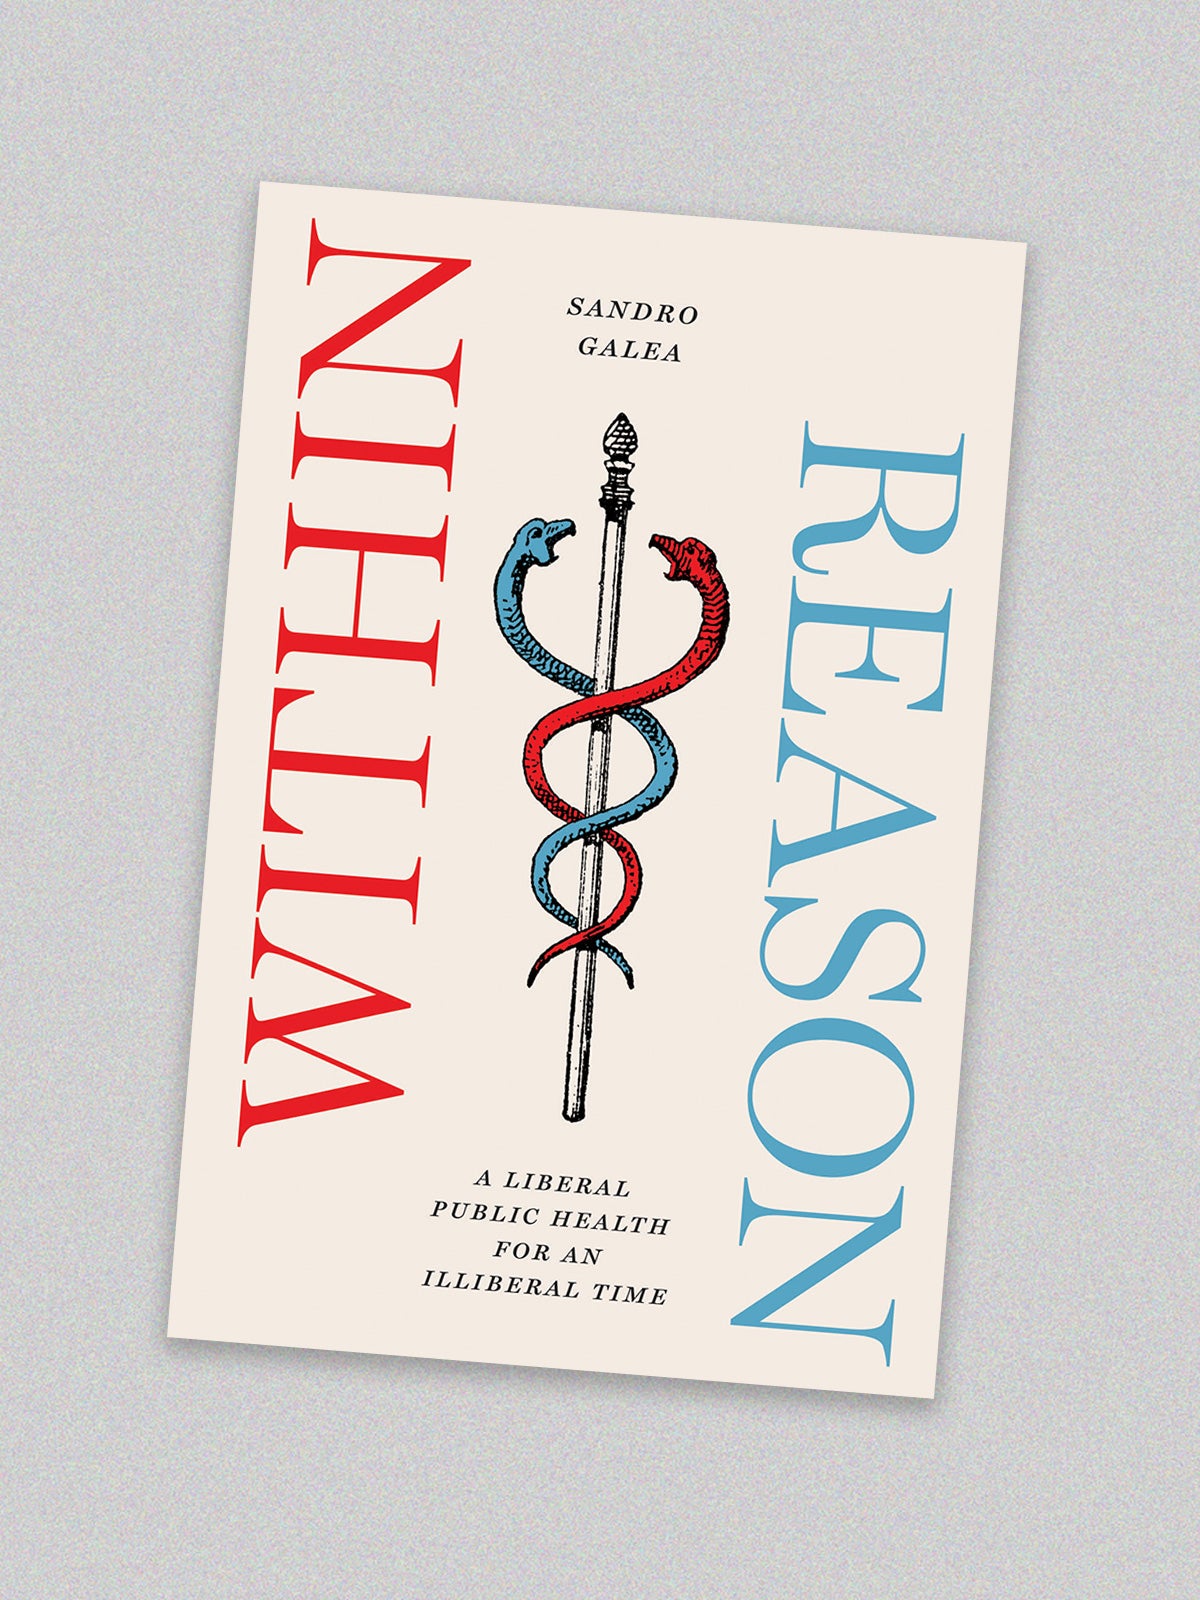 Book Cover for “Within Reason: A Liberal Public Health for an Illiberal Time” by Sandro Galea. The cover is beige with a caduceus in the center. One snake is blue, the other is red. The cover is placed on a light grey-speckled background.